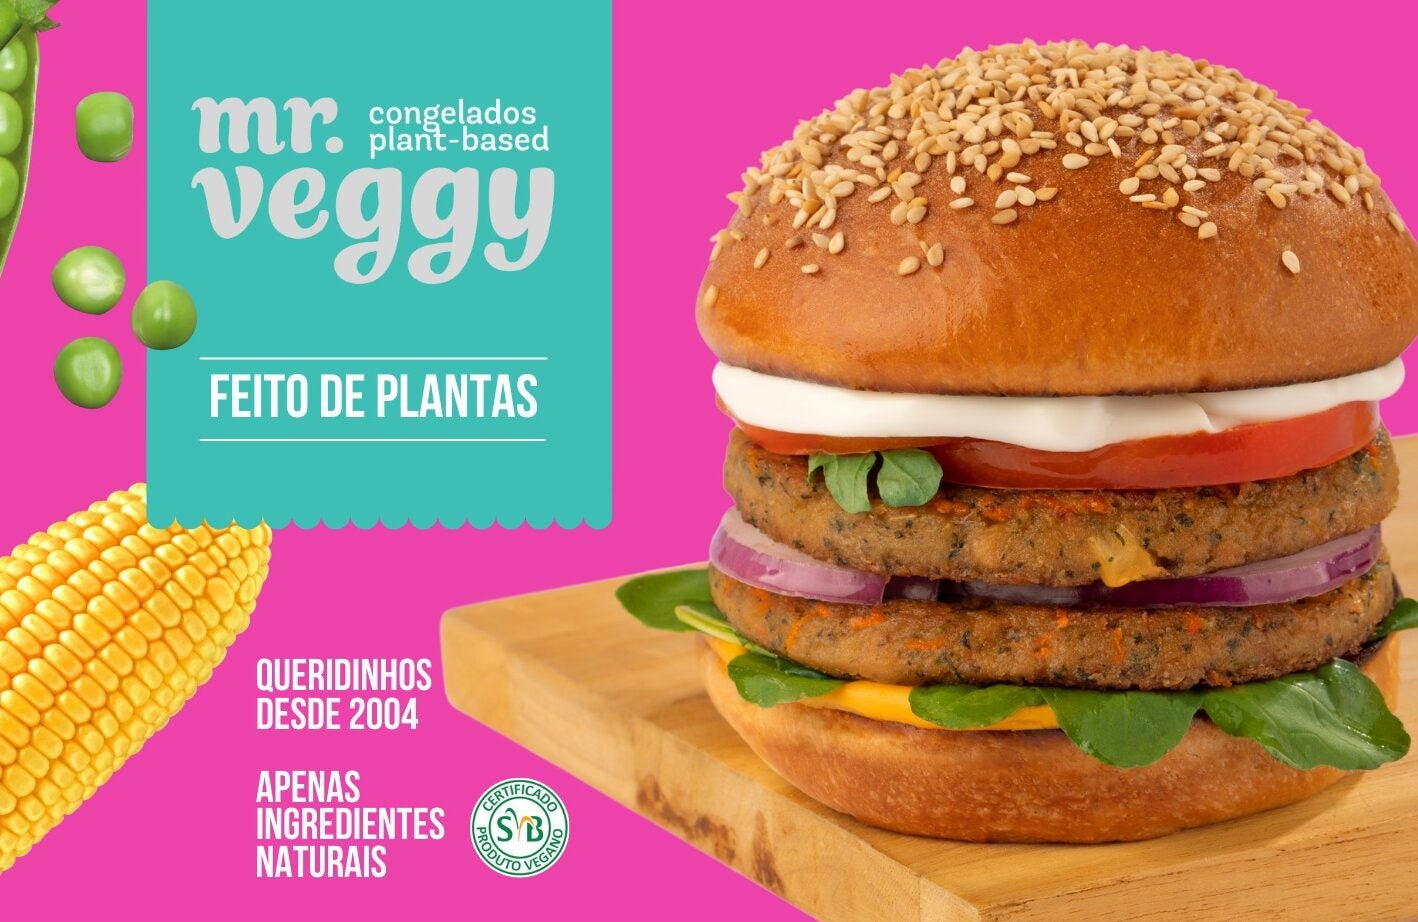 Grano Alimentos Brasil moves into plant-based with Mr. Veggy acquisition